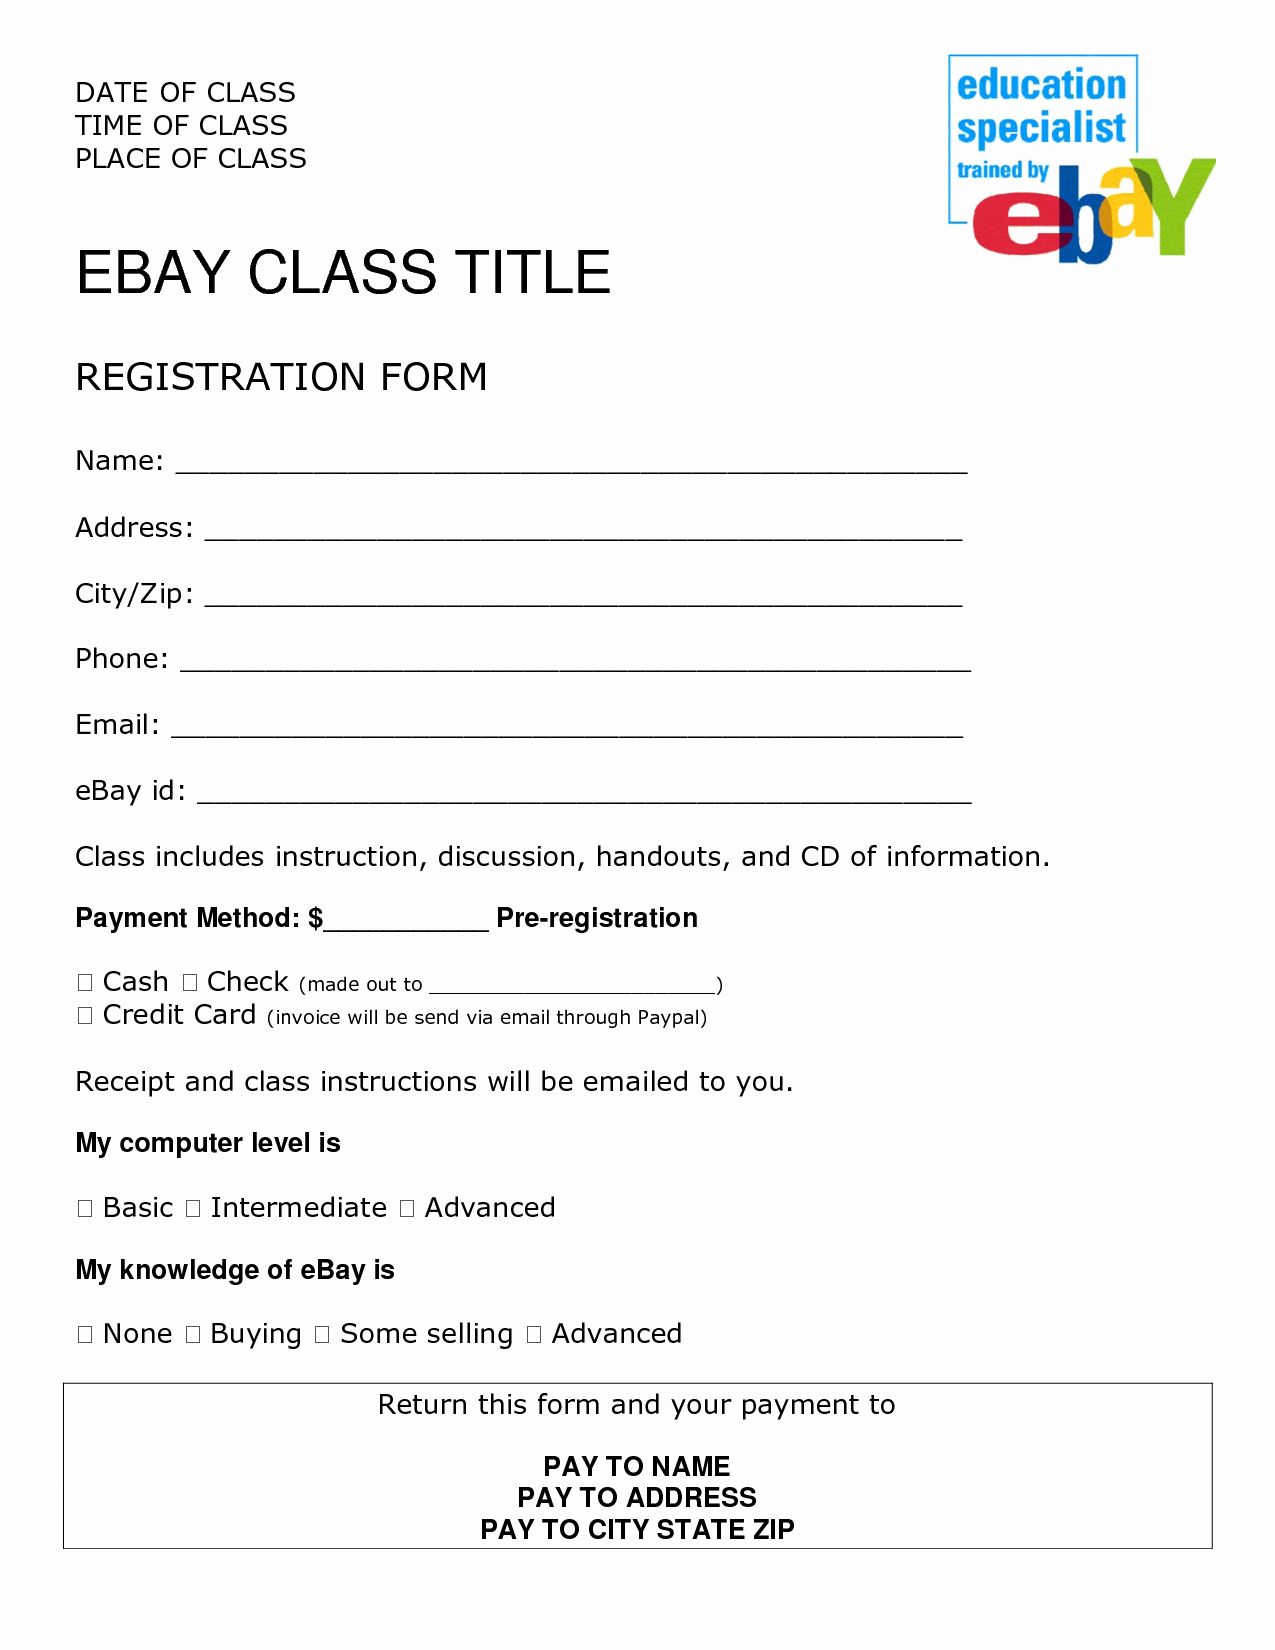 sign up form template word